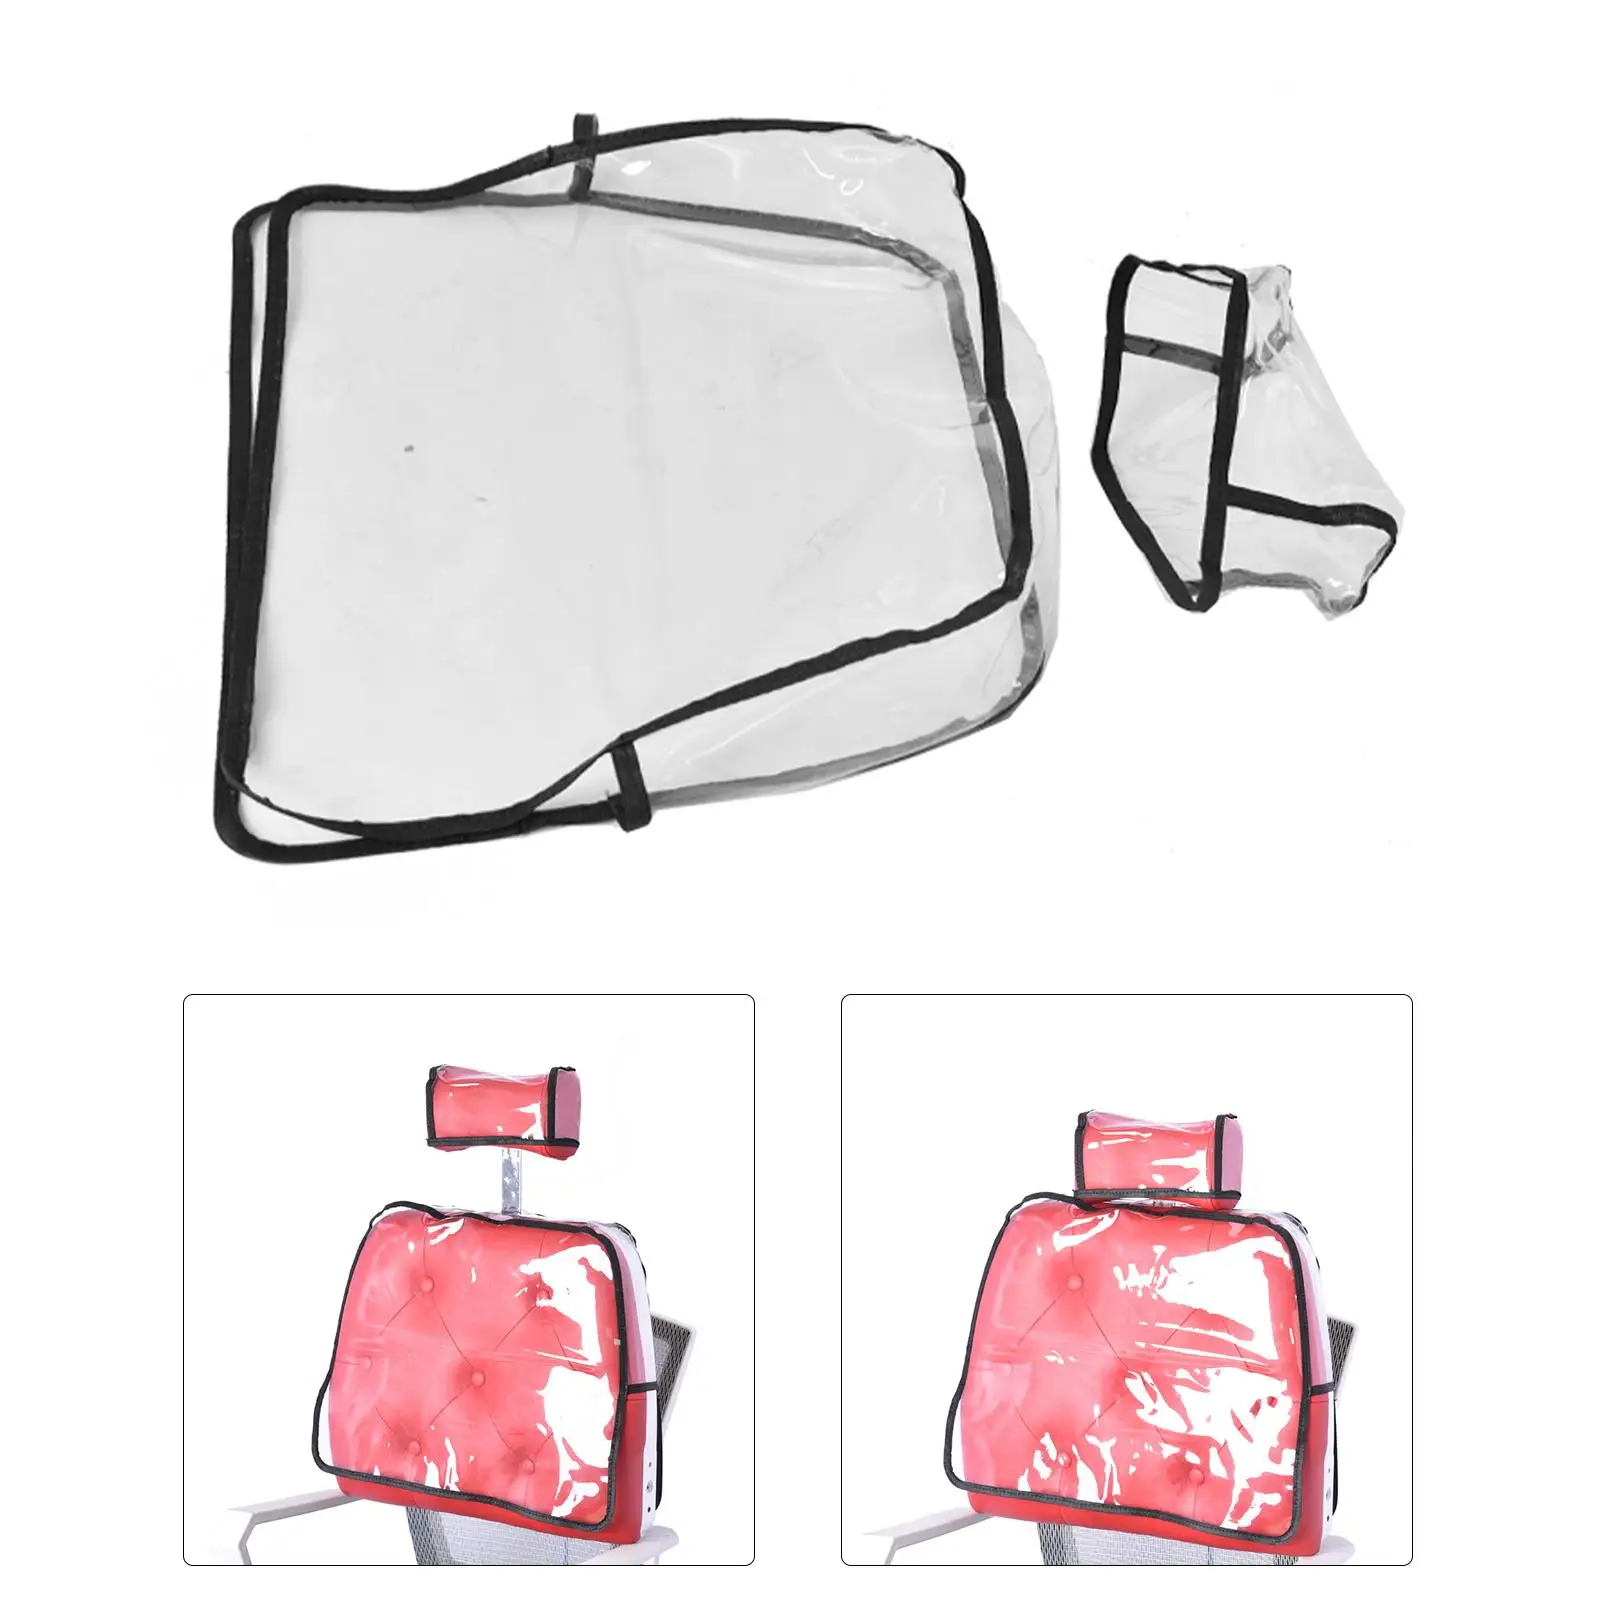 Chair Back Cover Beauty Equipment Professional Moisture Protective for Salon PVC Waterproof Chair Back Cover Protective